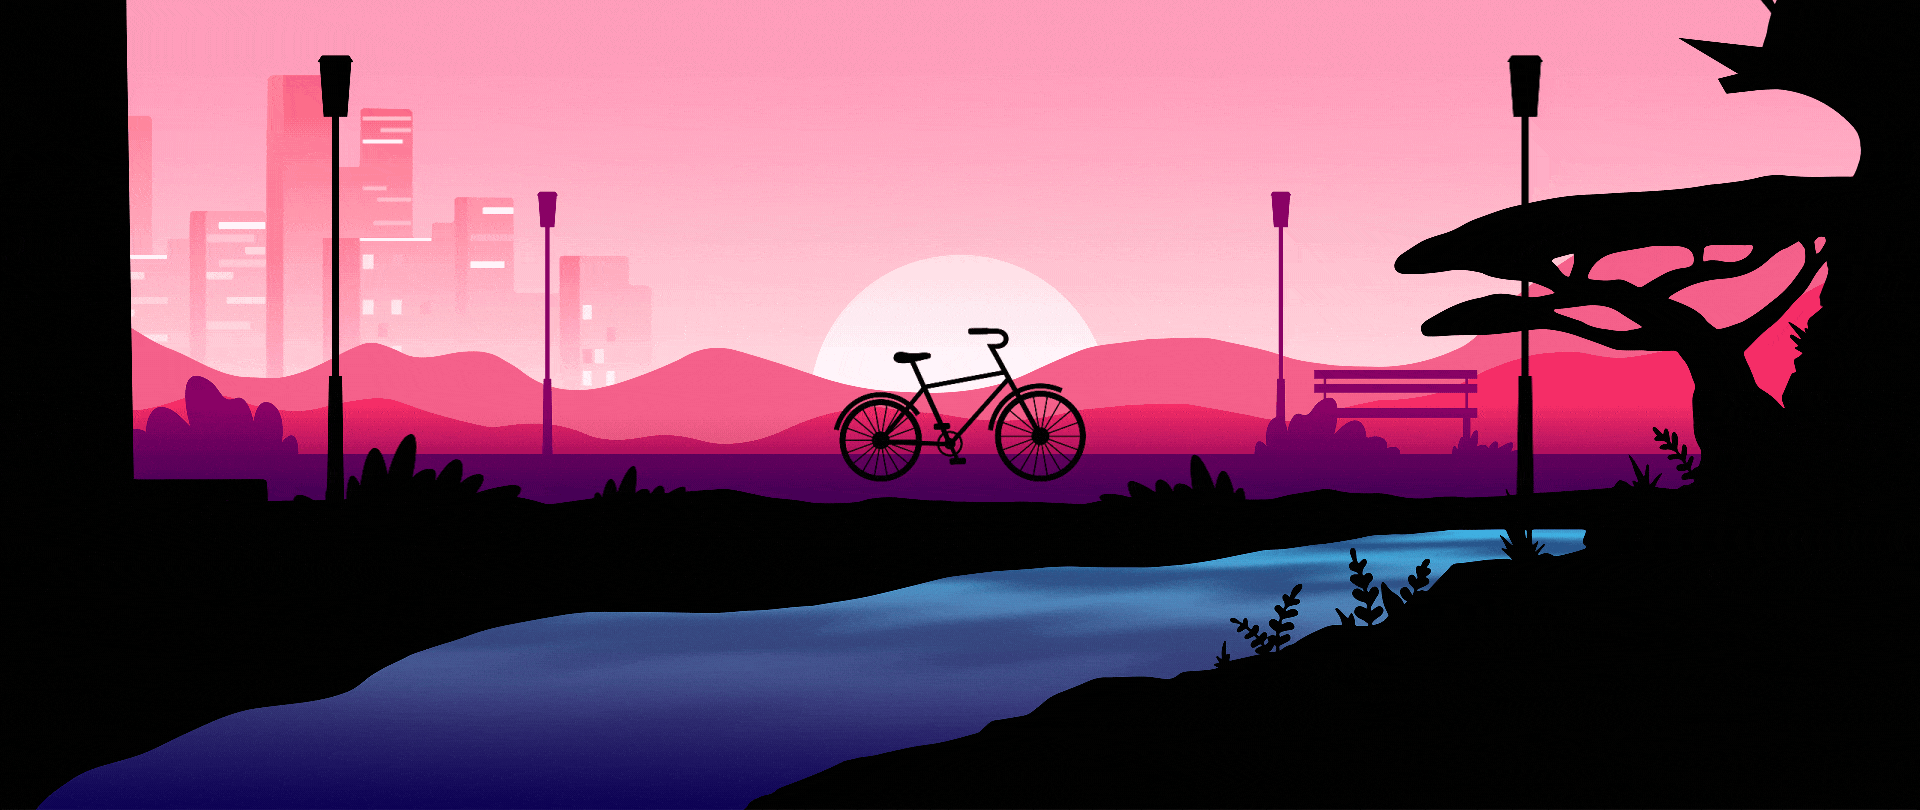 Bicycle_Night_City_Environment_Animated_Foreground_v1.gif